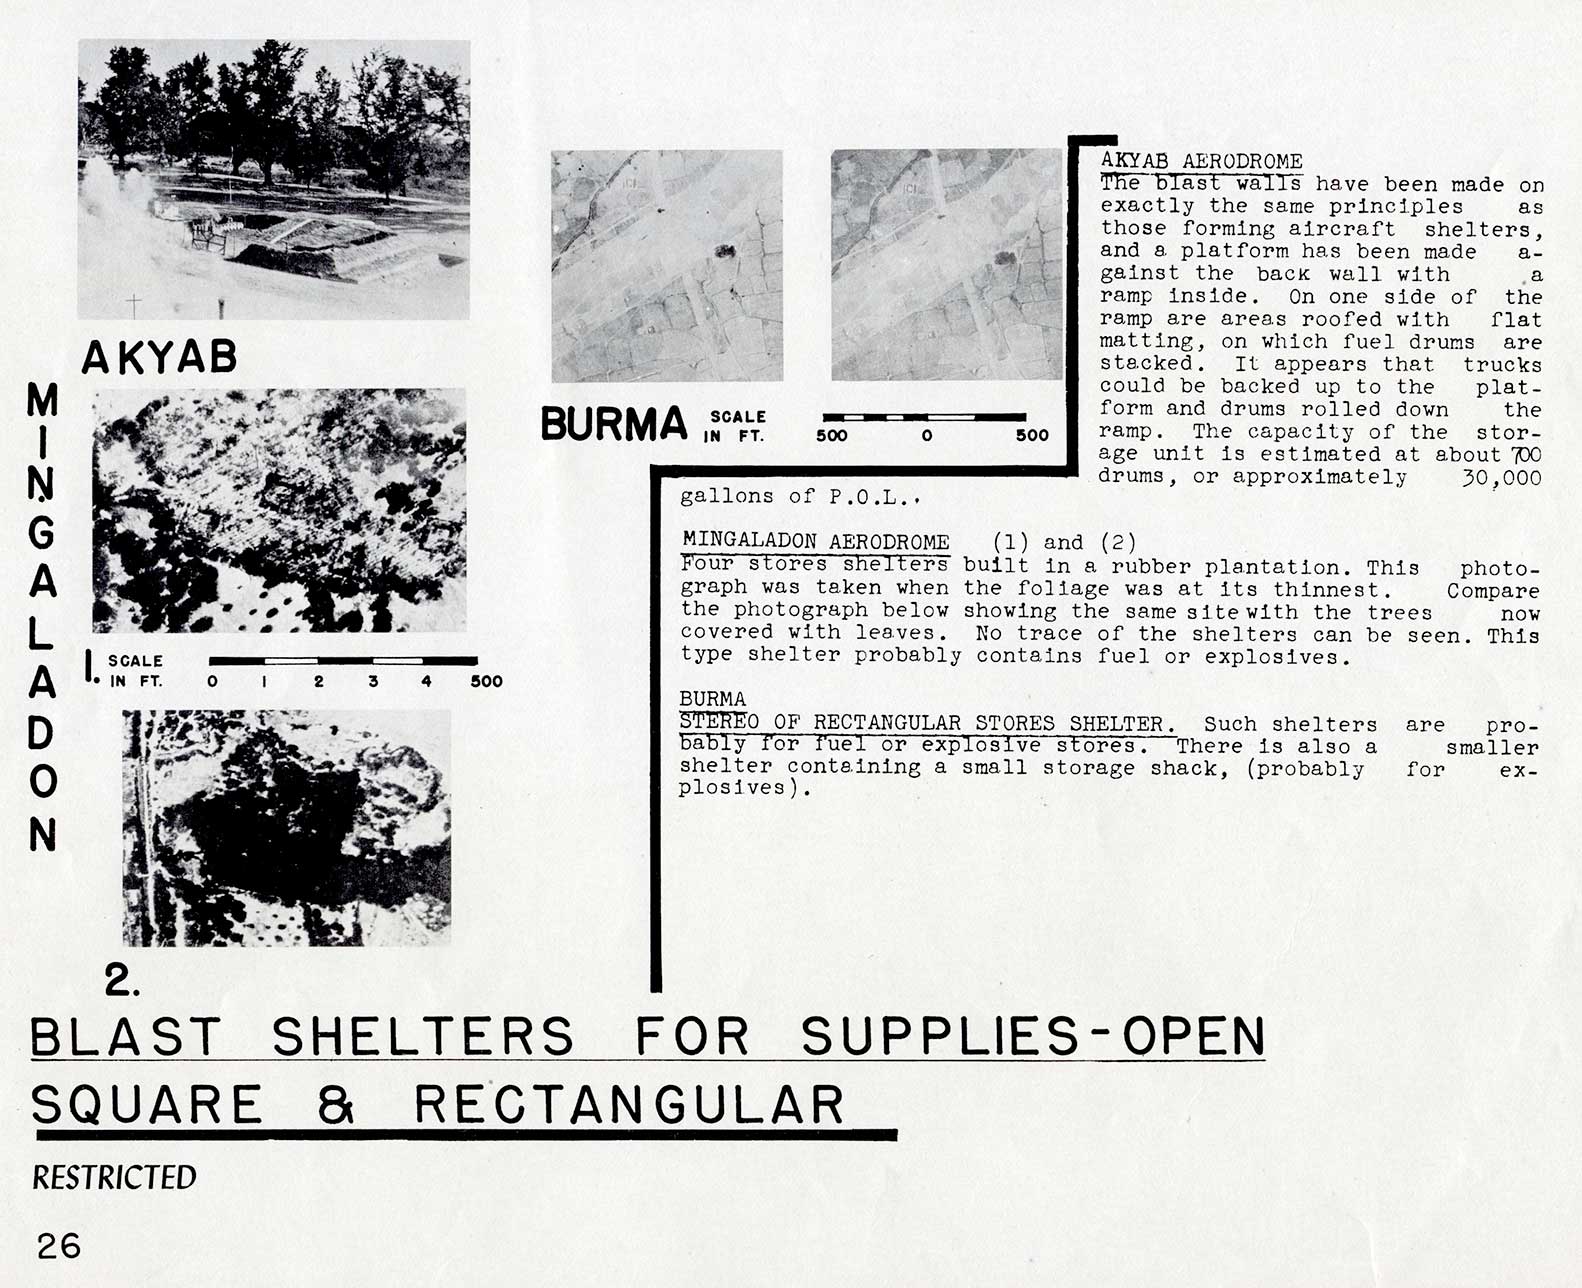 BLAST SHELTERS FOR SUPPLIES-OPEN SQUARE and RECTANGLULAR
AKYAB AERODROME
The blast warn have been made on exactly the same principles as those forming aircraft shelters, and a platform has been made against the back wall with a ramp inside. On one side of the ramp are areas roofed with flat matting, on which fuel drums are stacked. It appears that trucks could be backed up to the platform and drums rolled down the ramp. The capacity of the storage unit is estimated at about 700 drums, or approximately 30,000 gallons of P.O.L.

MINGALADON AERODROME (1) and (2) Four stores shelters built in a rubber plantation. This photograph was taken when the foliage was at its thinnest. Compare the photograph below showing the same site with the trees now covered with leaves. No trace of the shelters can be seen. This type shelter probably contains fuel or explosives.

BURMA 
STEREO OF RECTANGULAR STORES SHELTER. Such shelters are probably for fuel or explosive stores. There is also a smaller shelter containing a small storage shack, (probably for explosives).
26
